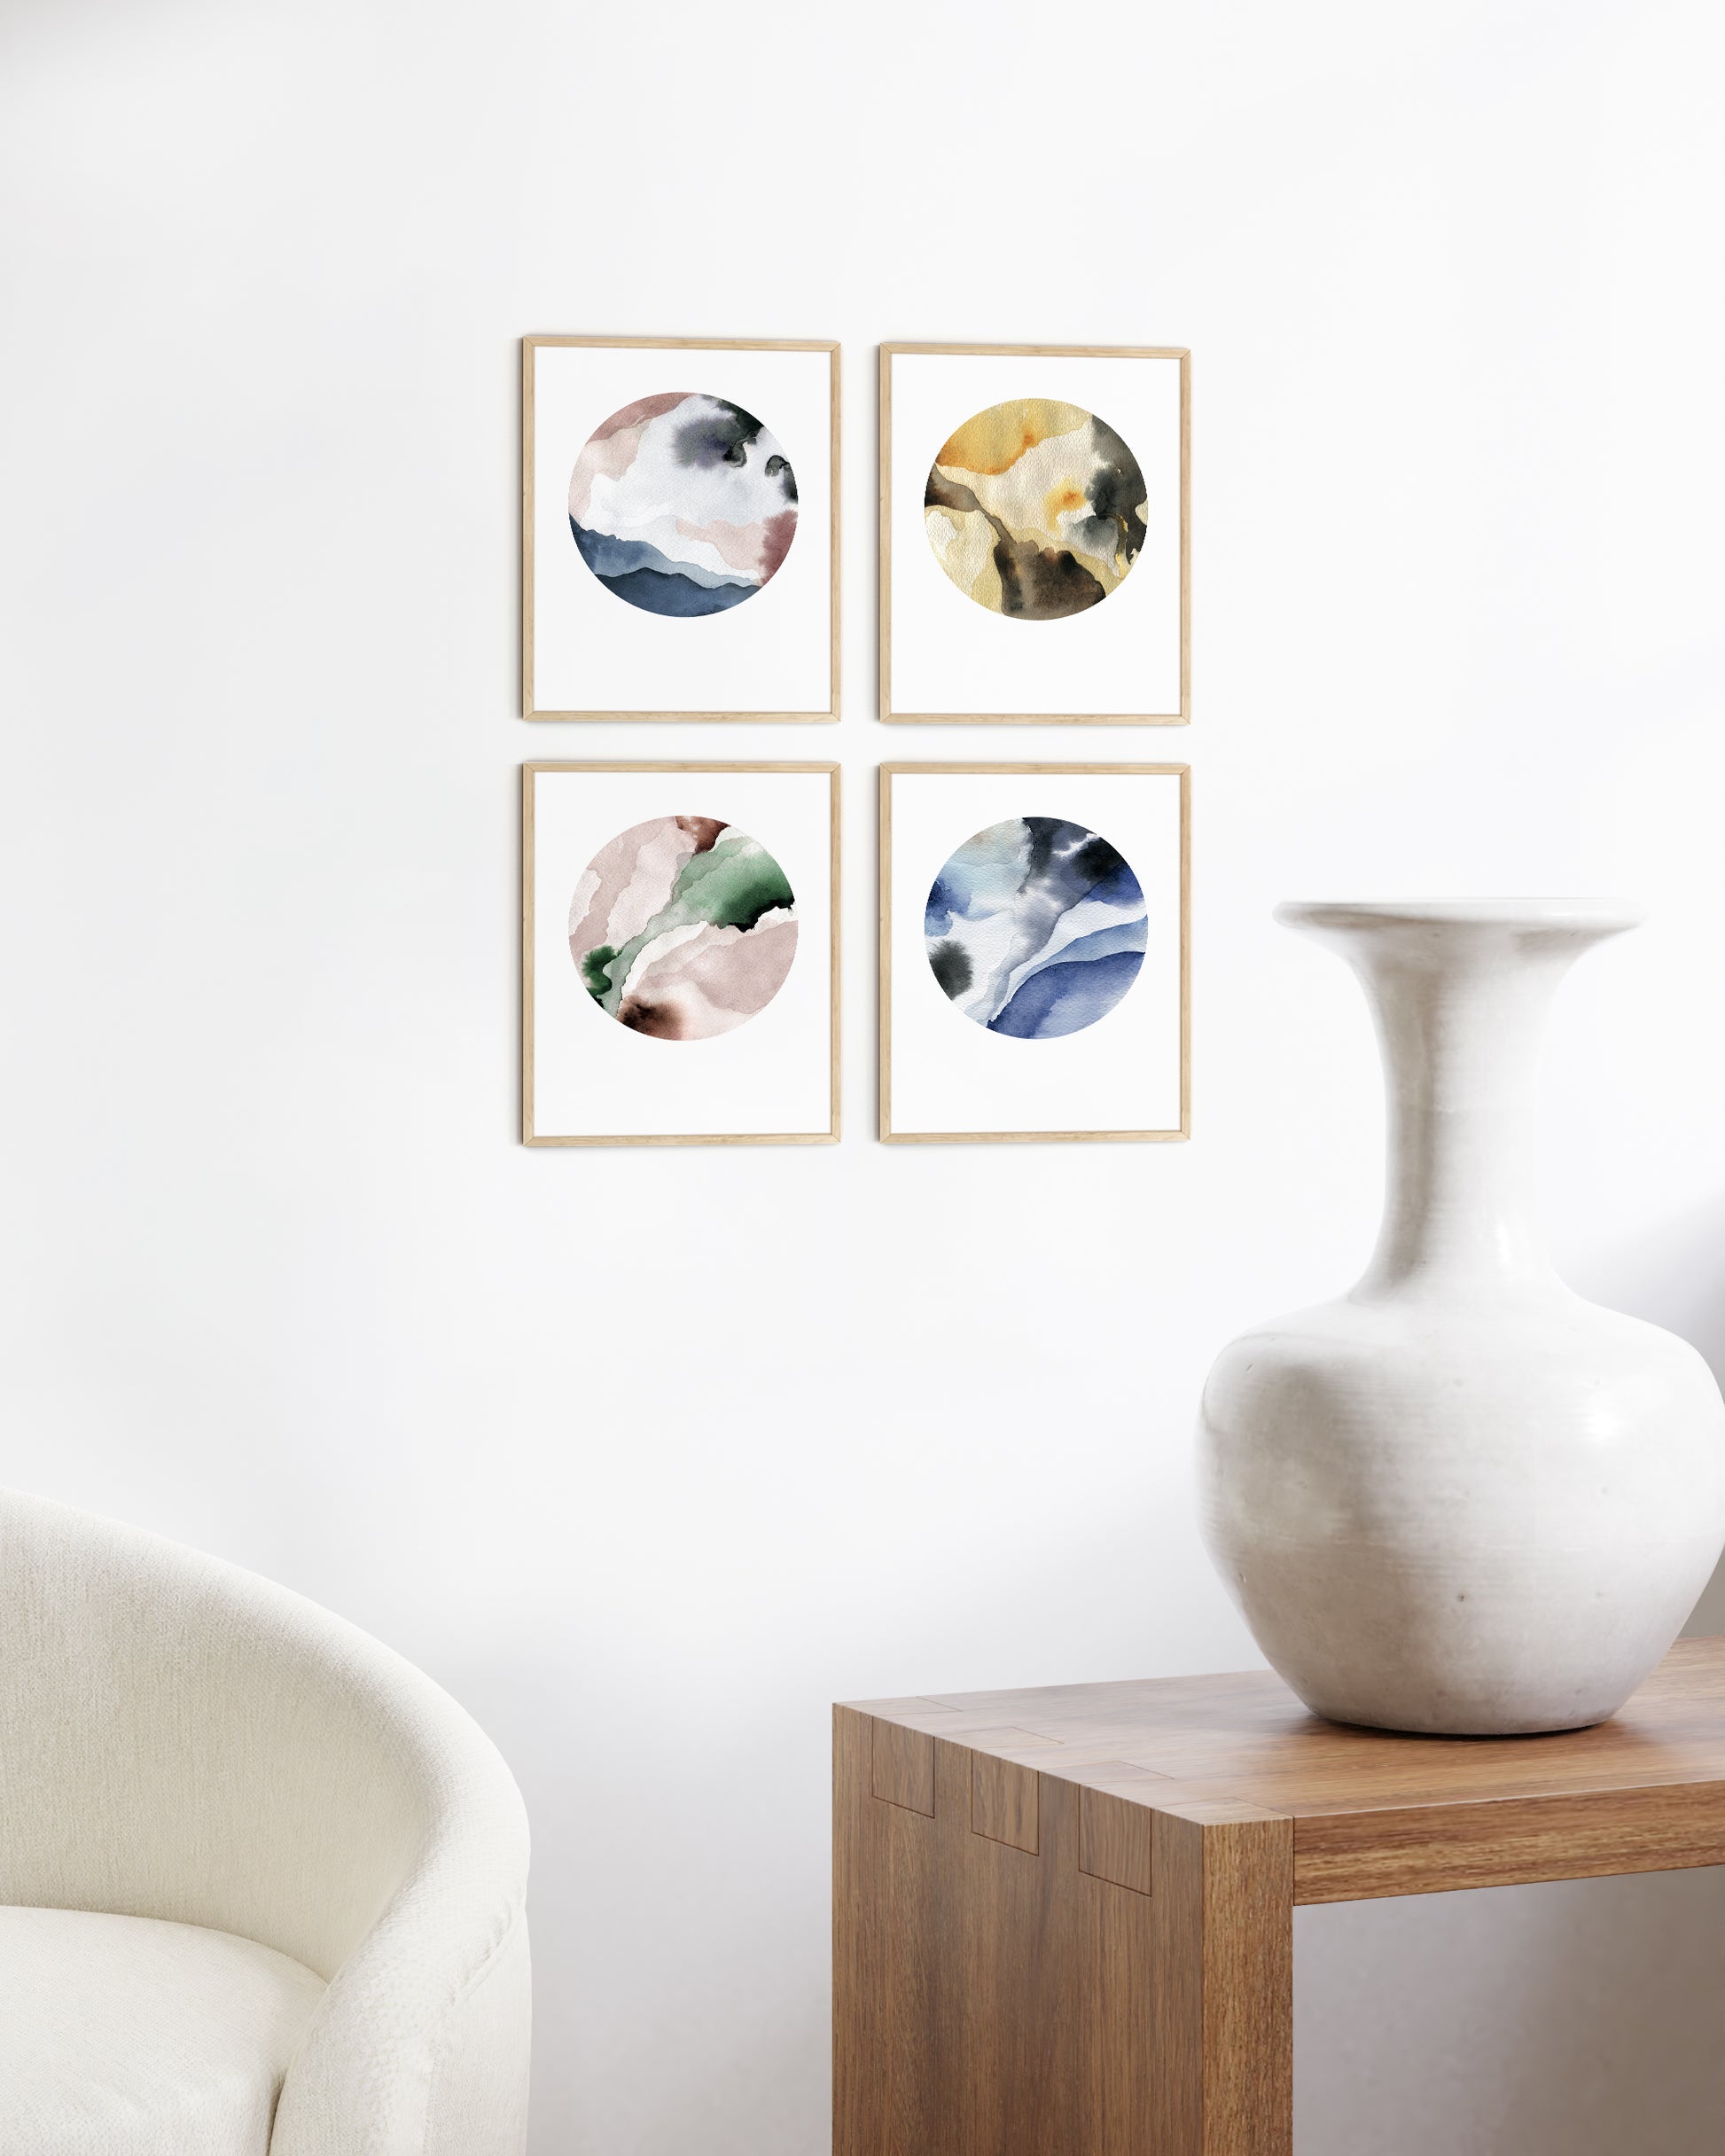 8x10 in, Set of 6, White Oak Frame – Haus and Hues